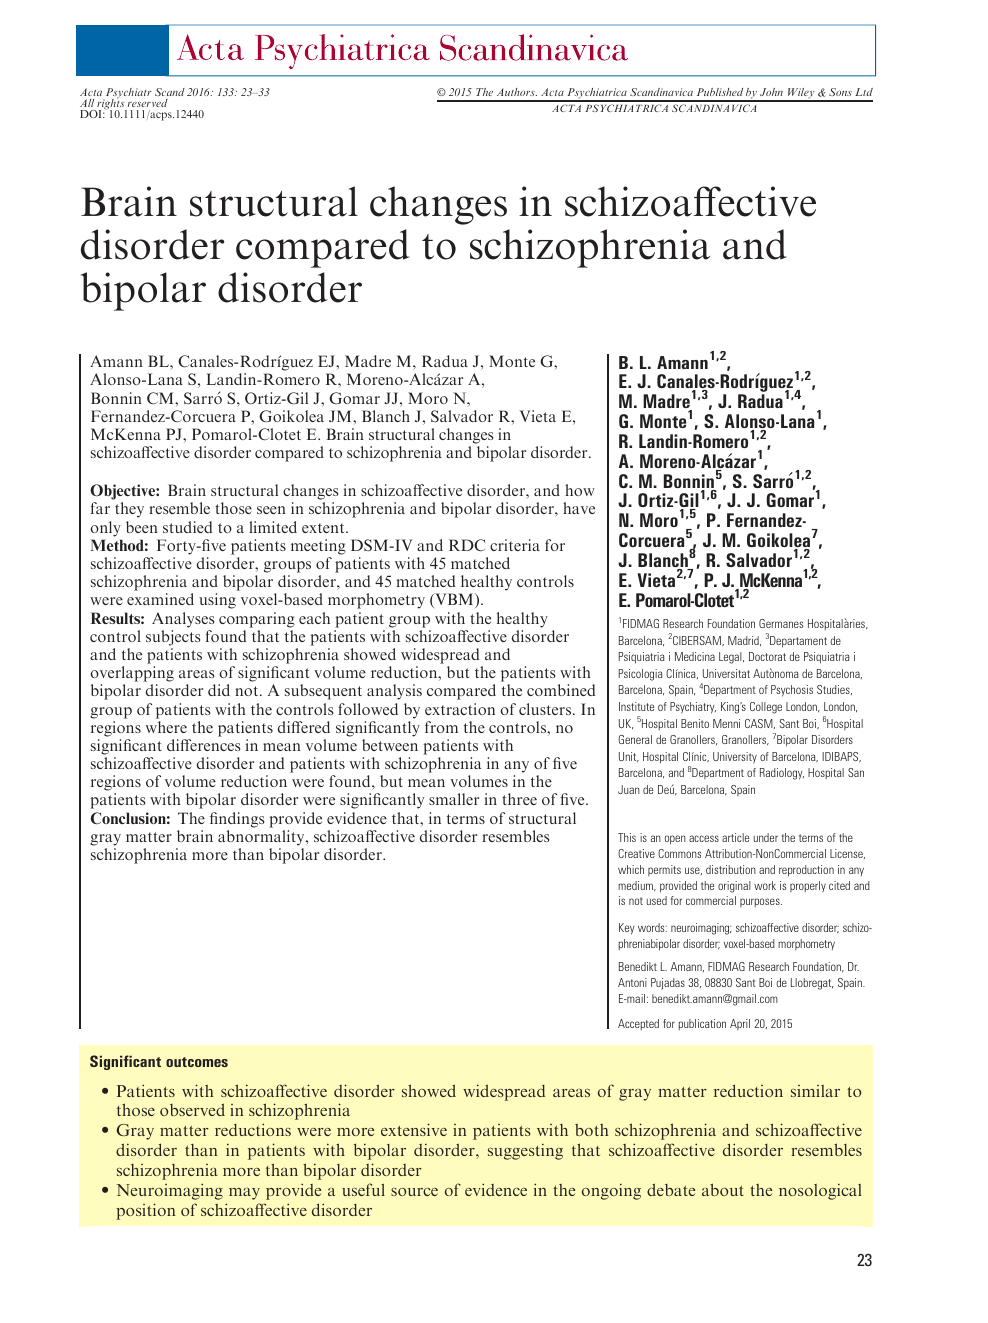 Brain structural changes in schizoaffective disorder compared to  schizophrenia and bipolar disorder – topic of research paper in Clinical  medicine. Download scholarly article PDF and read for free on CyberLeninka  open science